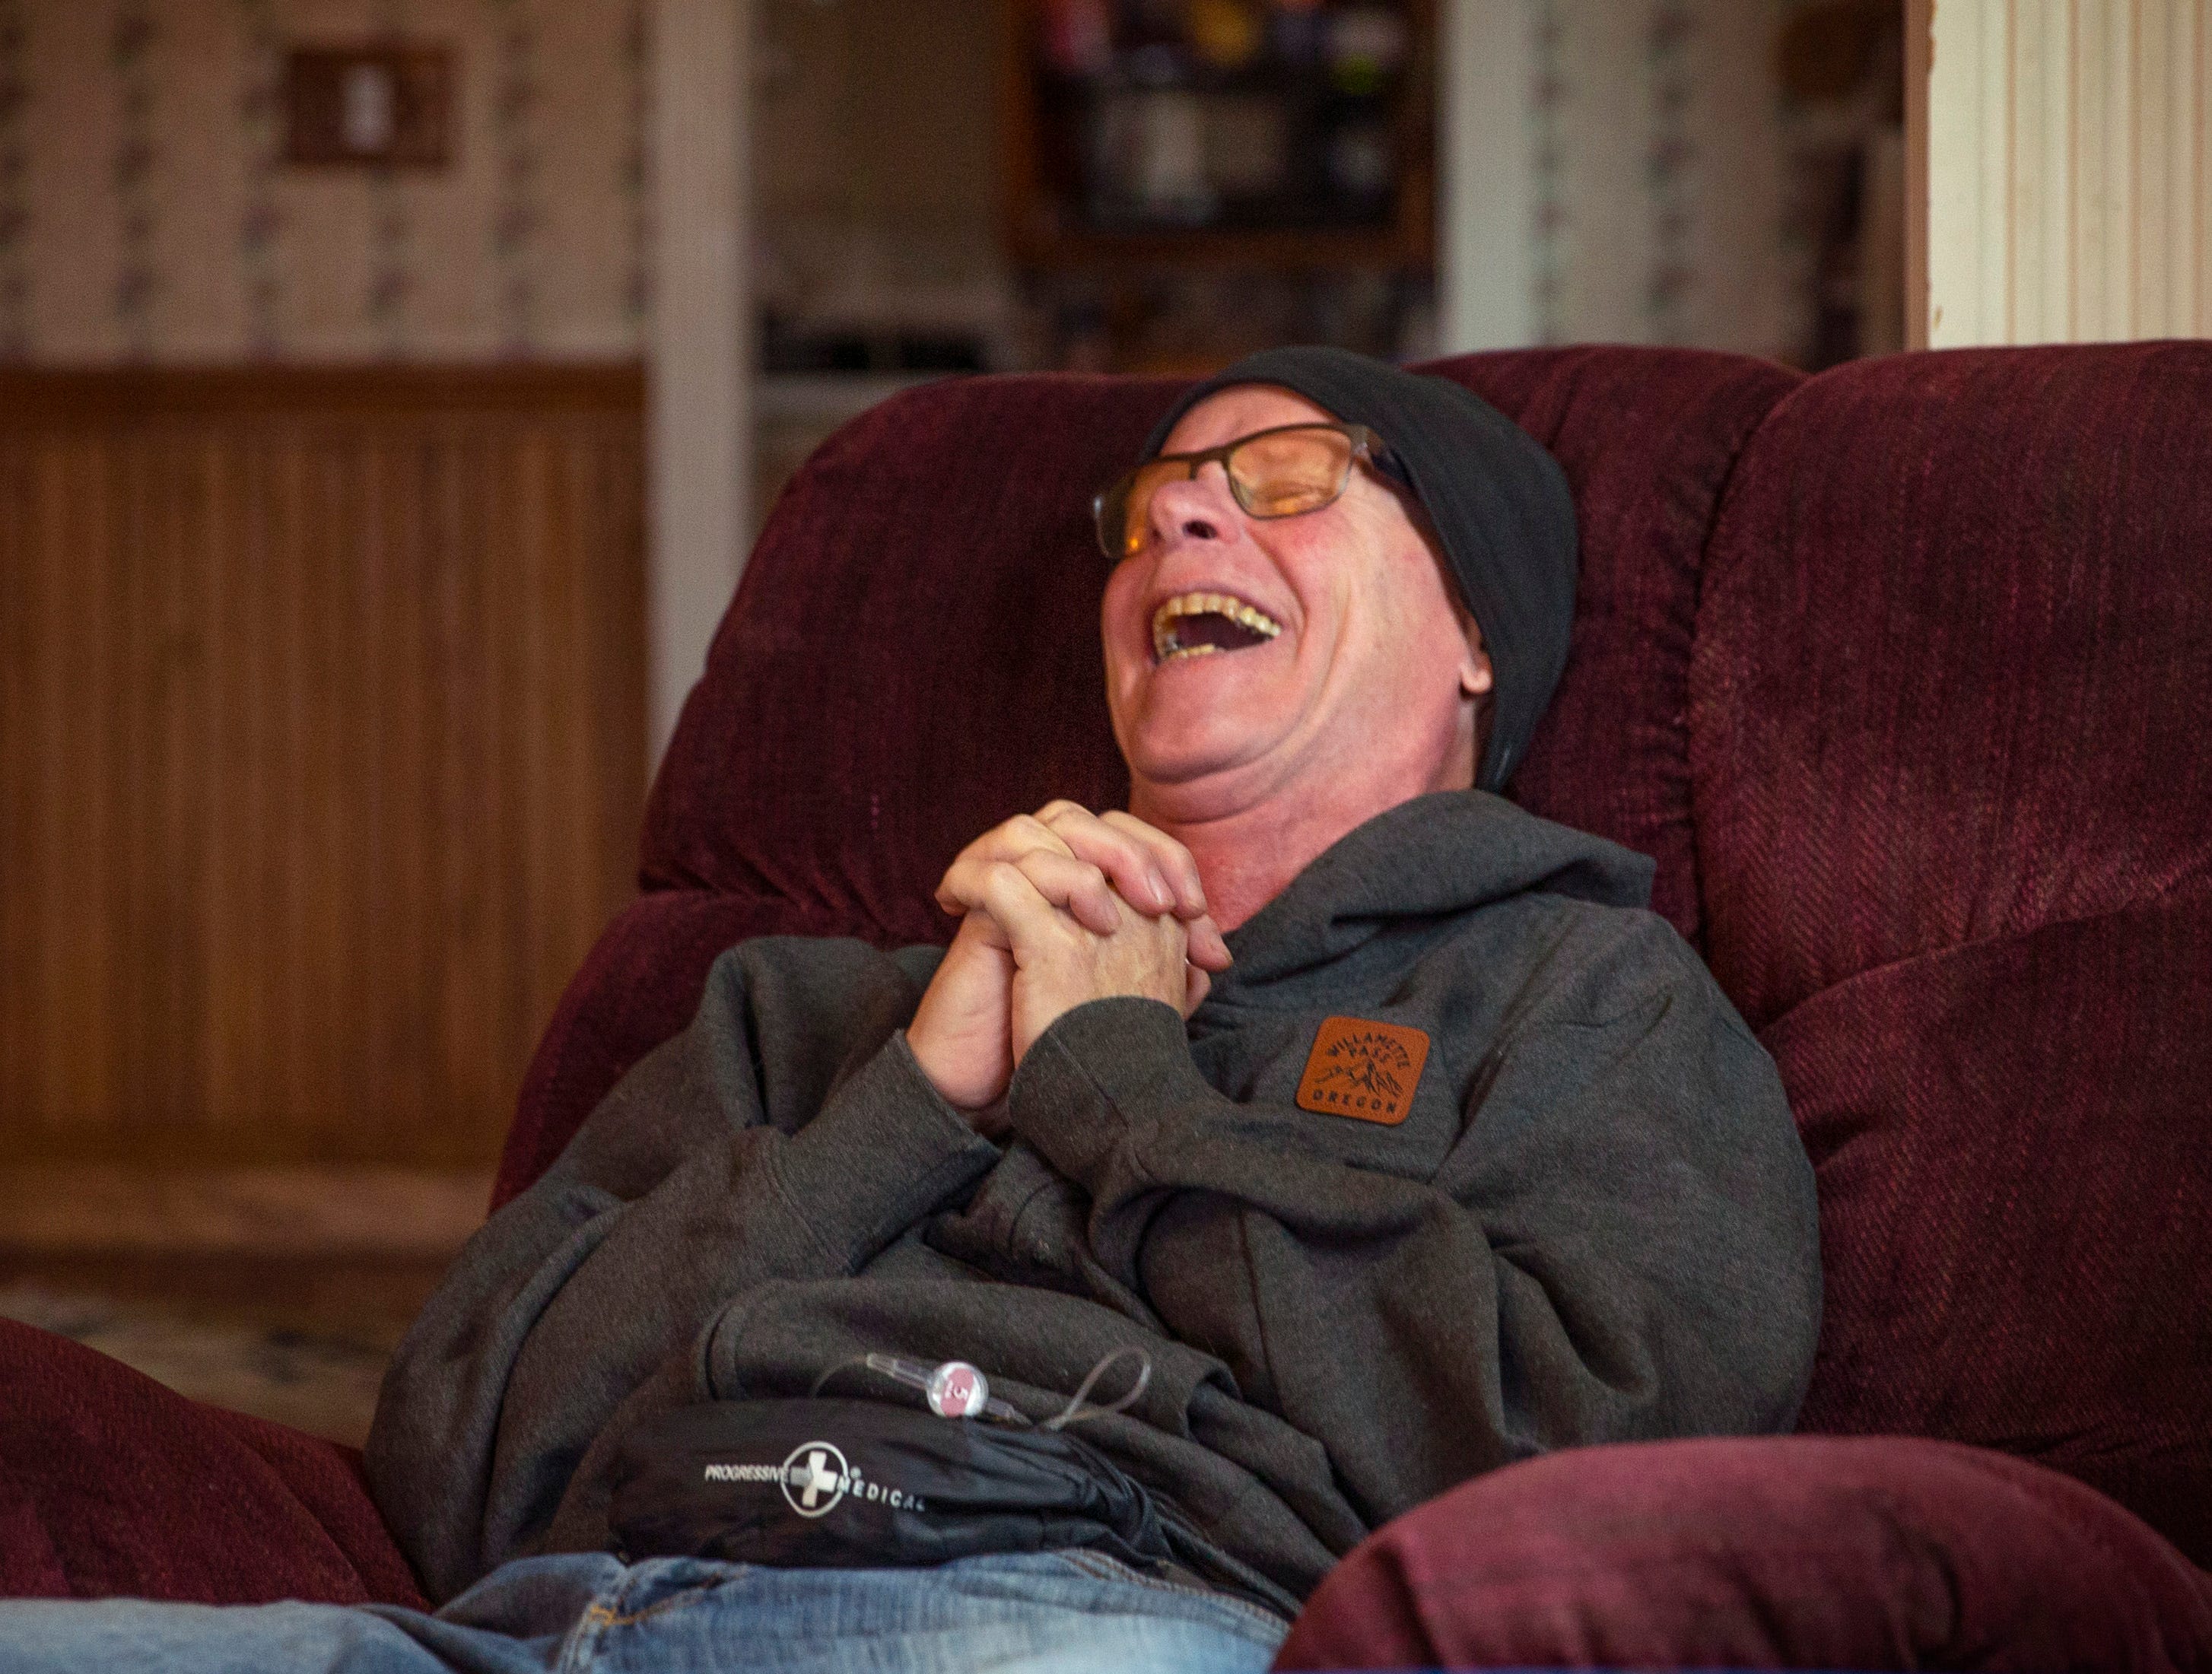 Steve Connelly laughs as he talks about the happy moments in his life during a counseling session with his death doula. 

“To live a good life, to be a humble human, you have to have gratitude,” Connelly said. “It sucks that I’m dying but we are otherwise unbelievably blessed by really kind people around us, fabulous community, and this wonderful place we live in."